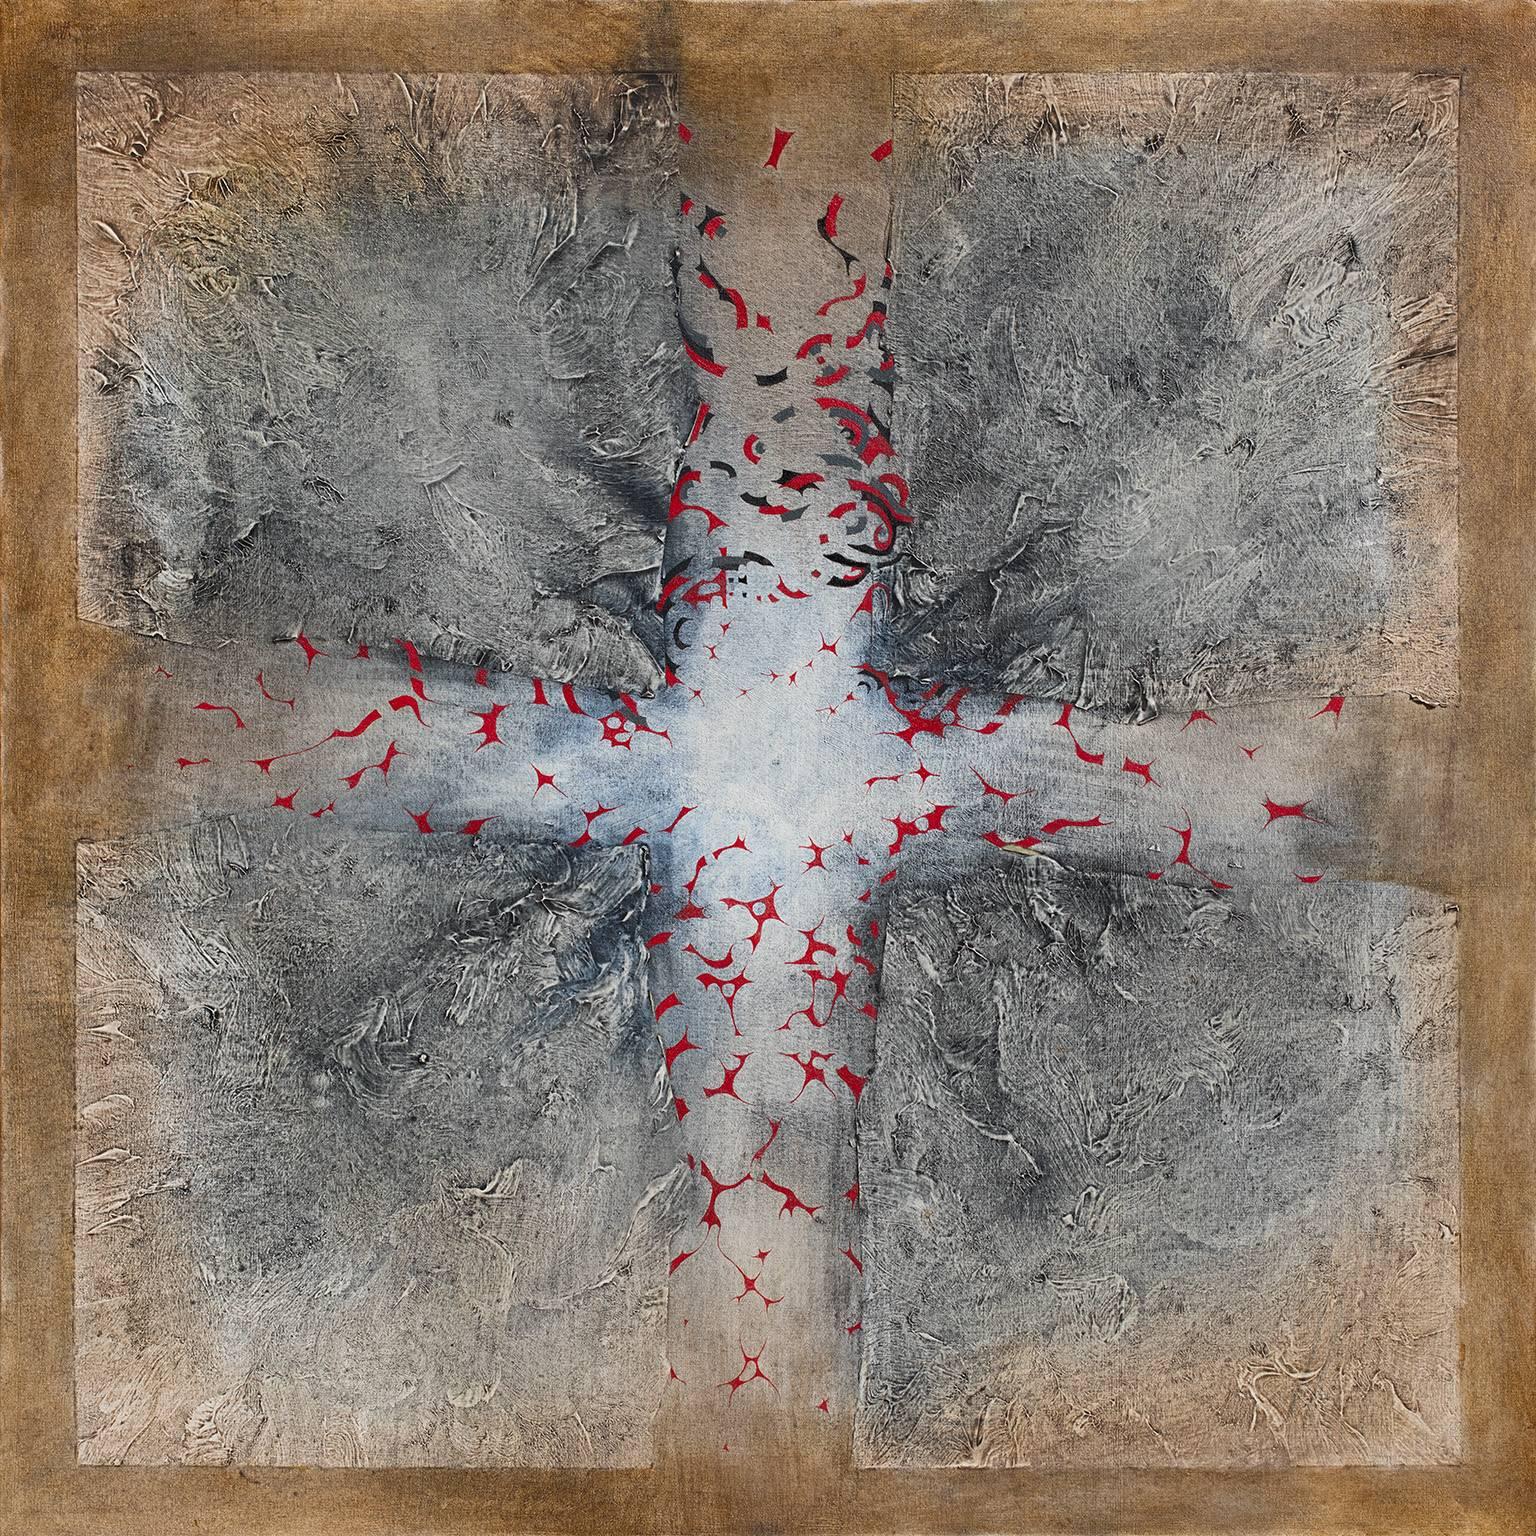 Gian Berto Vanni Abstract Painting - Magnetism - Square Abstract Geometric Oil Painting with Cross